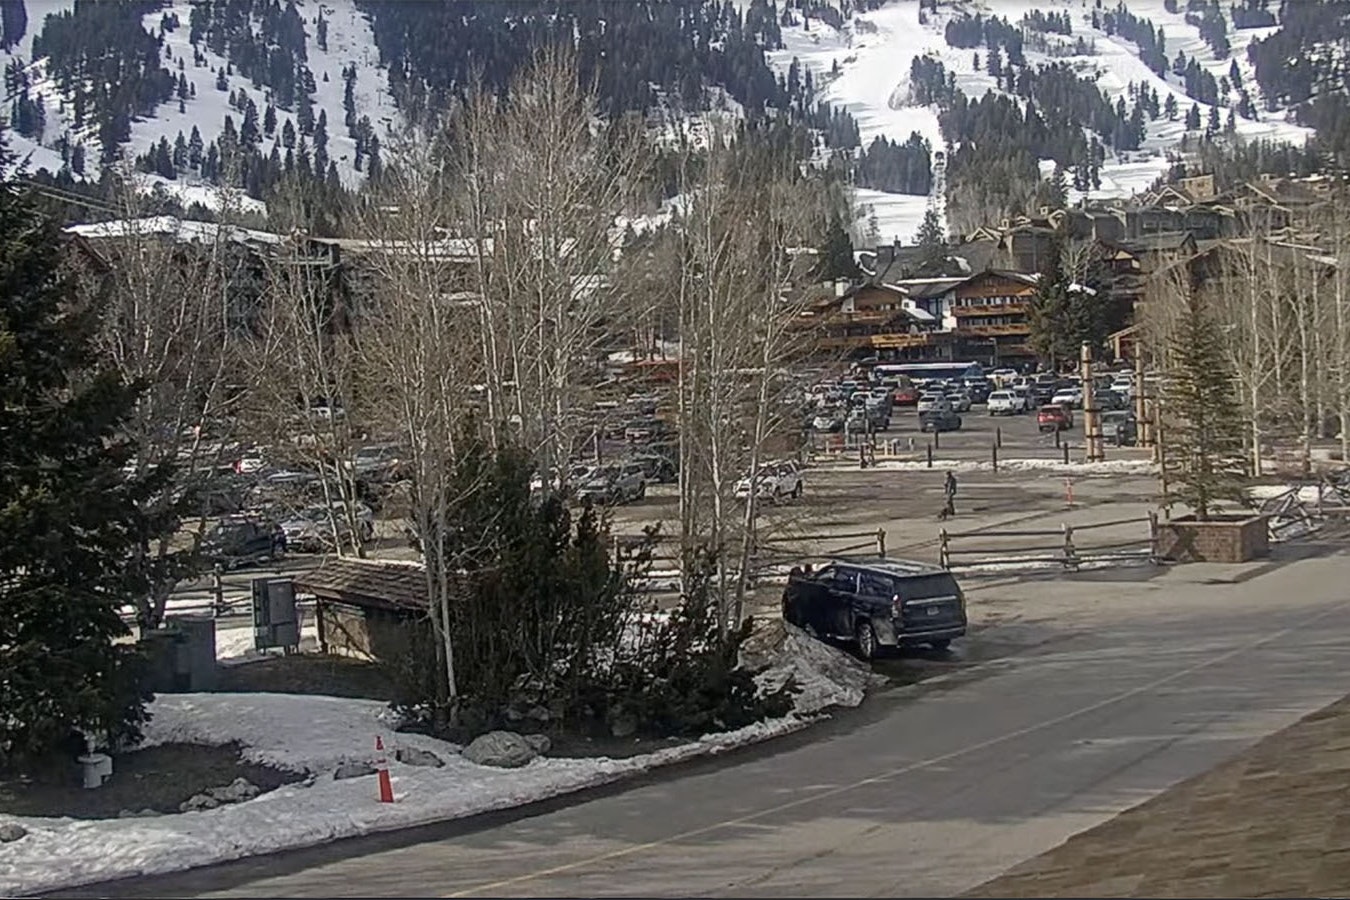 Parking lots at Teton Village fill up fast even at $35-$45 dollars a day. Because Jackson Hole Mountain Resort workers are required to pay for parking, they've been exploiting a hack to park free — until a local cartoonist outed the hack.